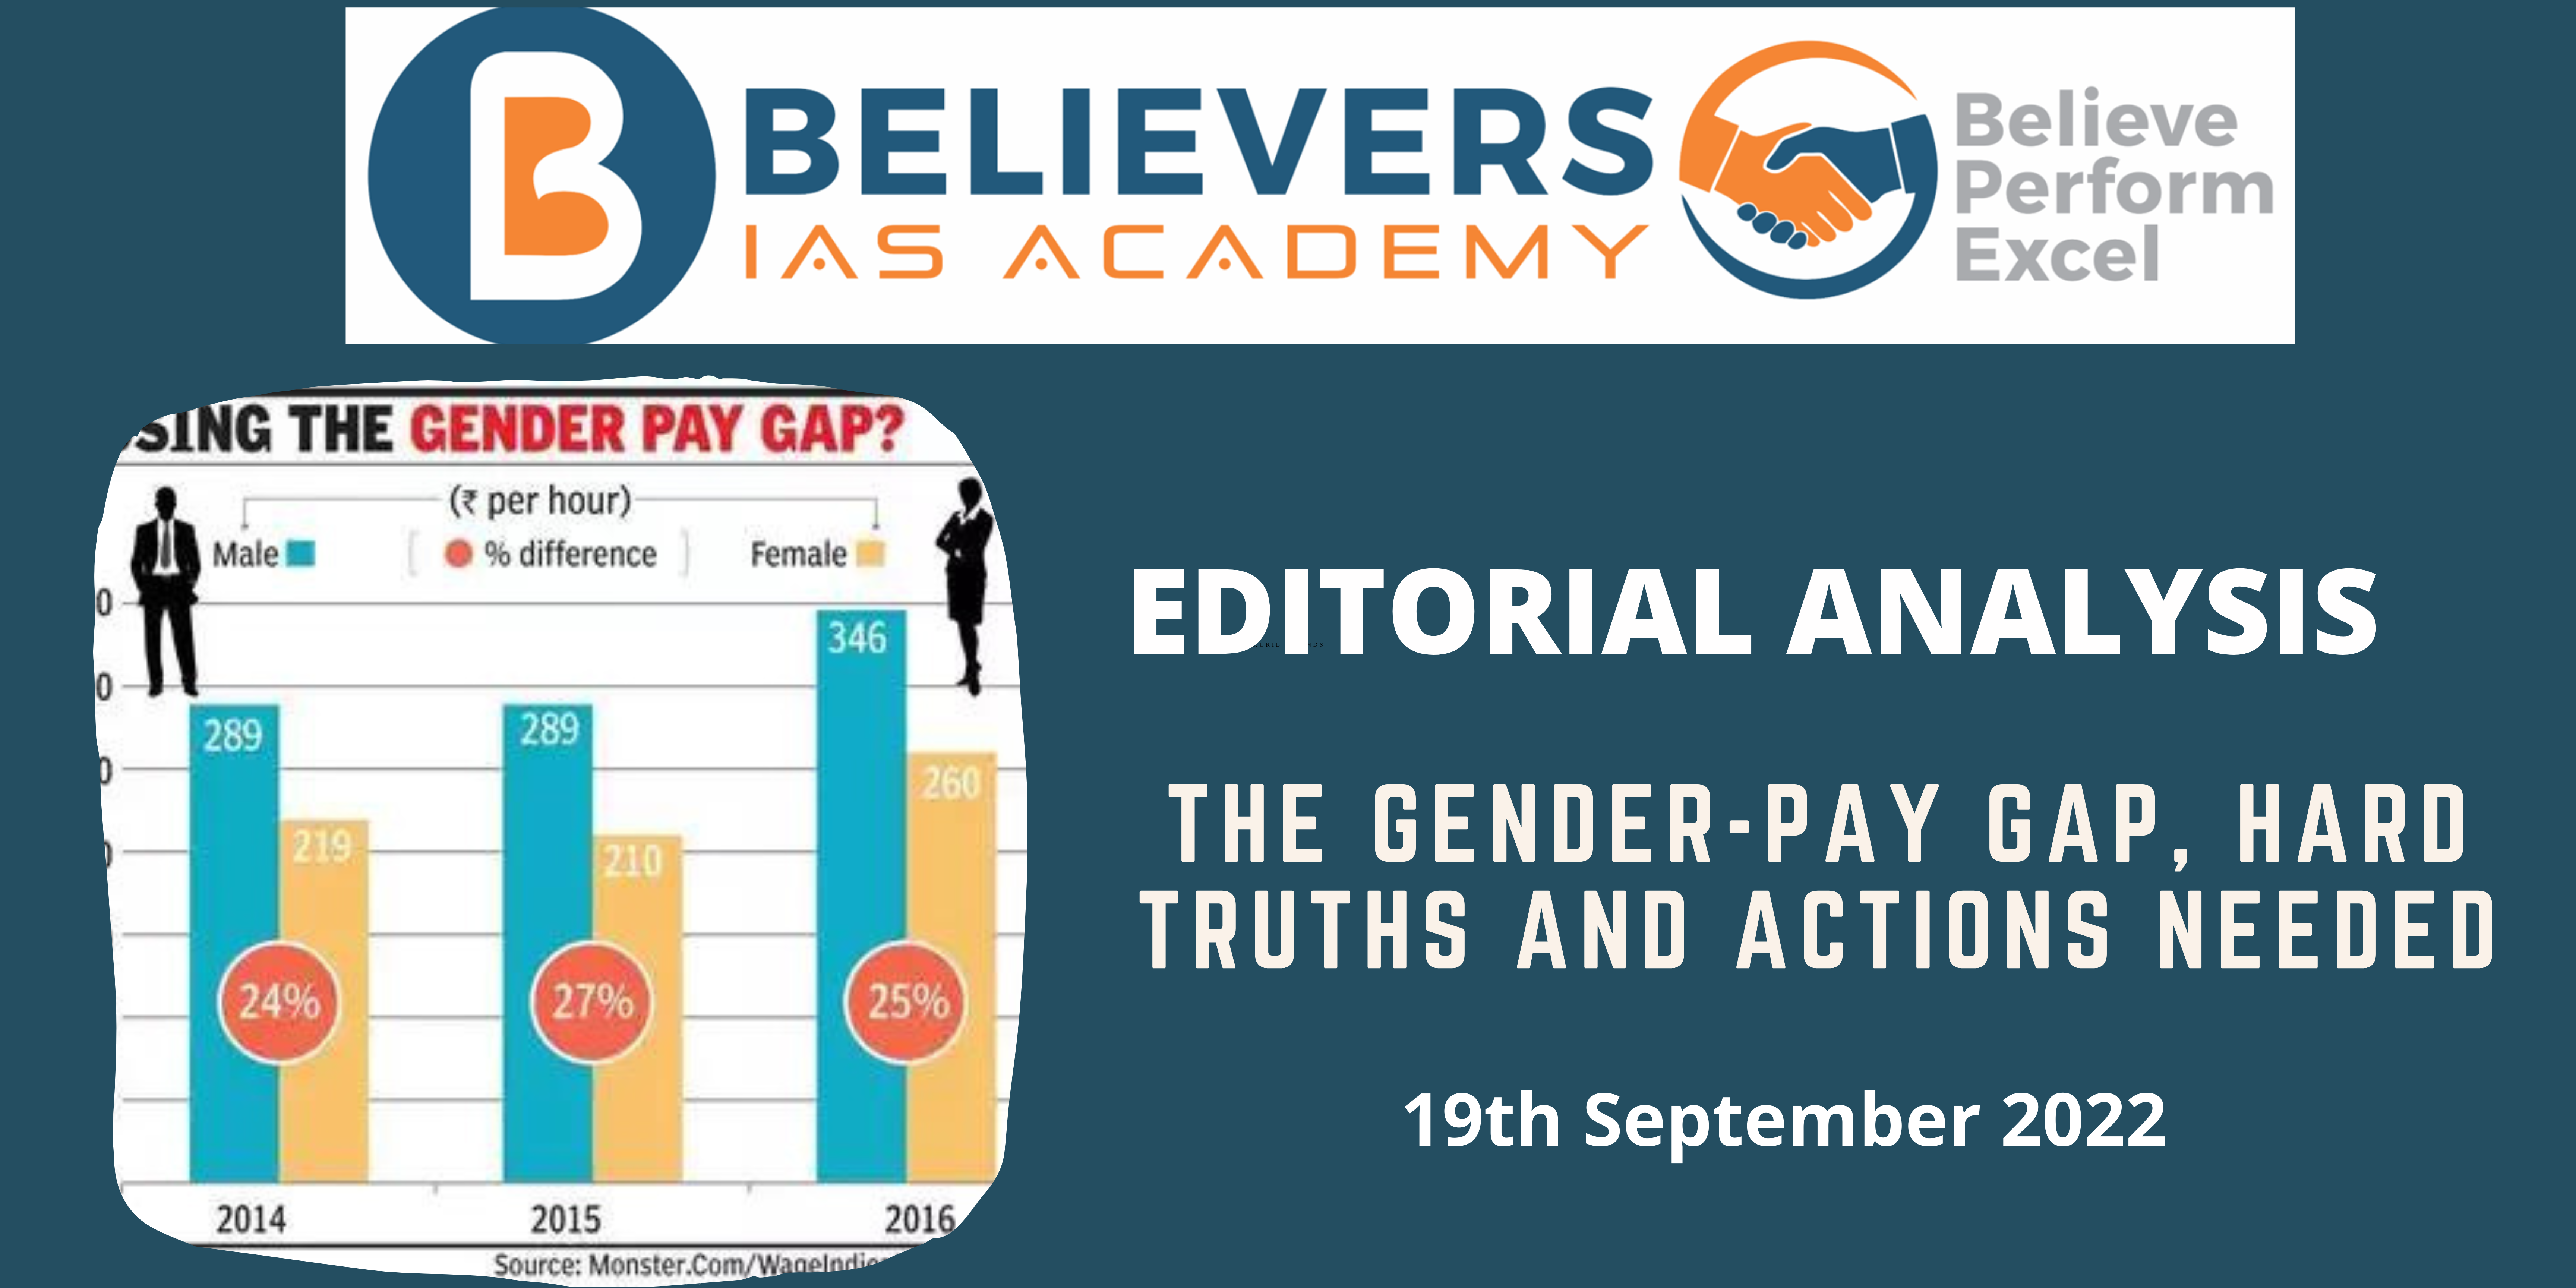 The gender-pay gap, hard truths and actions needed